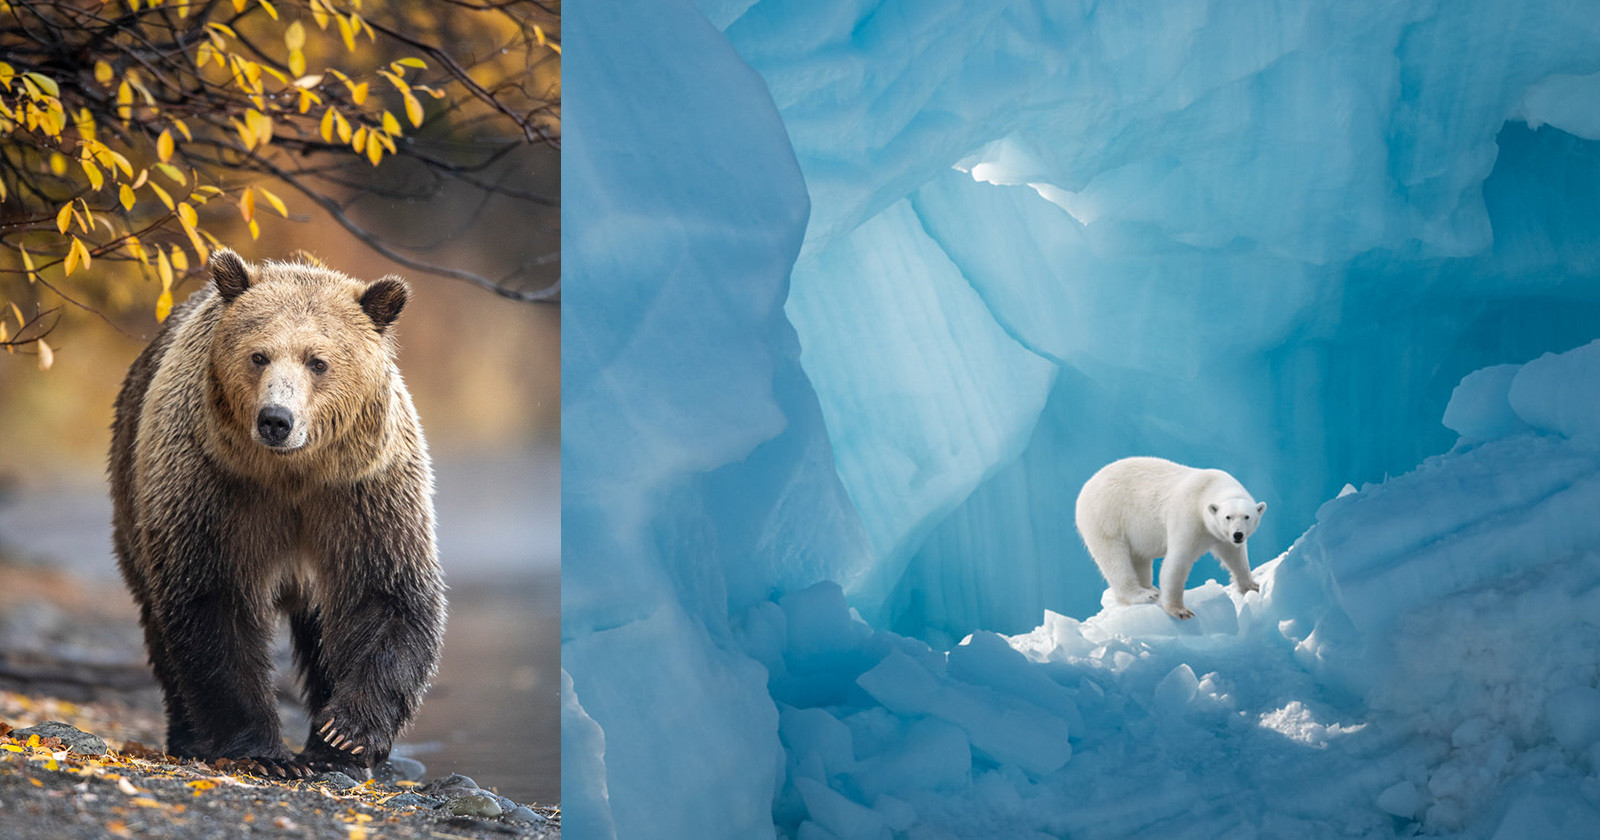 Photo Book Showcases the 8 Remaining Bear Species on Earth